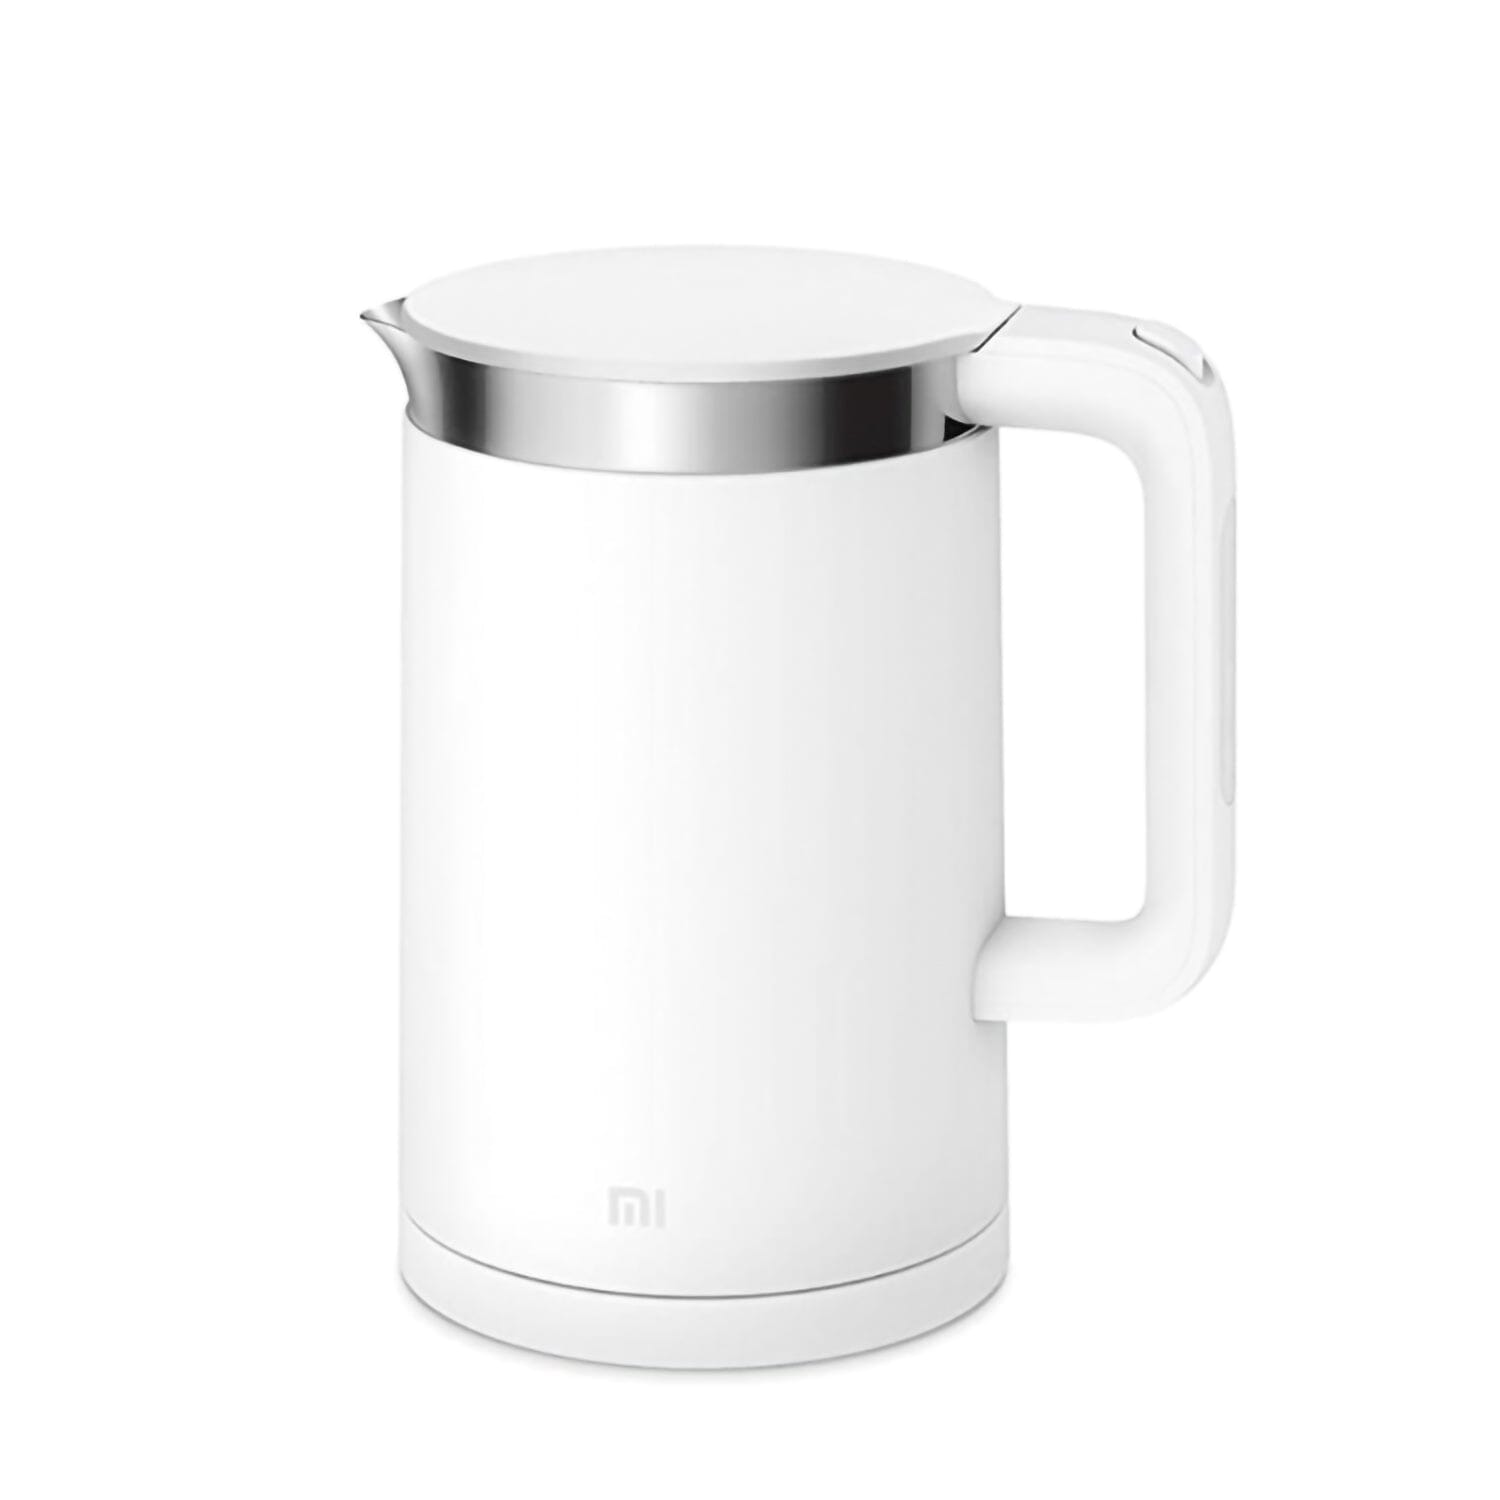 Xiaomi Mi Smart Electric Kettle Pro 1800W Fast Boiling 1.5L Stainless Steel with LED Digital Screen and App Control via Bluetooth [Local Official Warranty] Xiaomi 